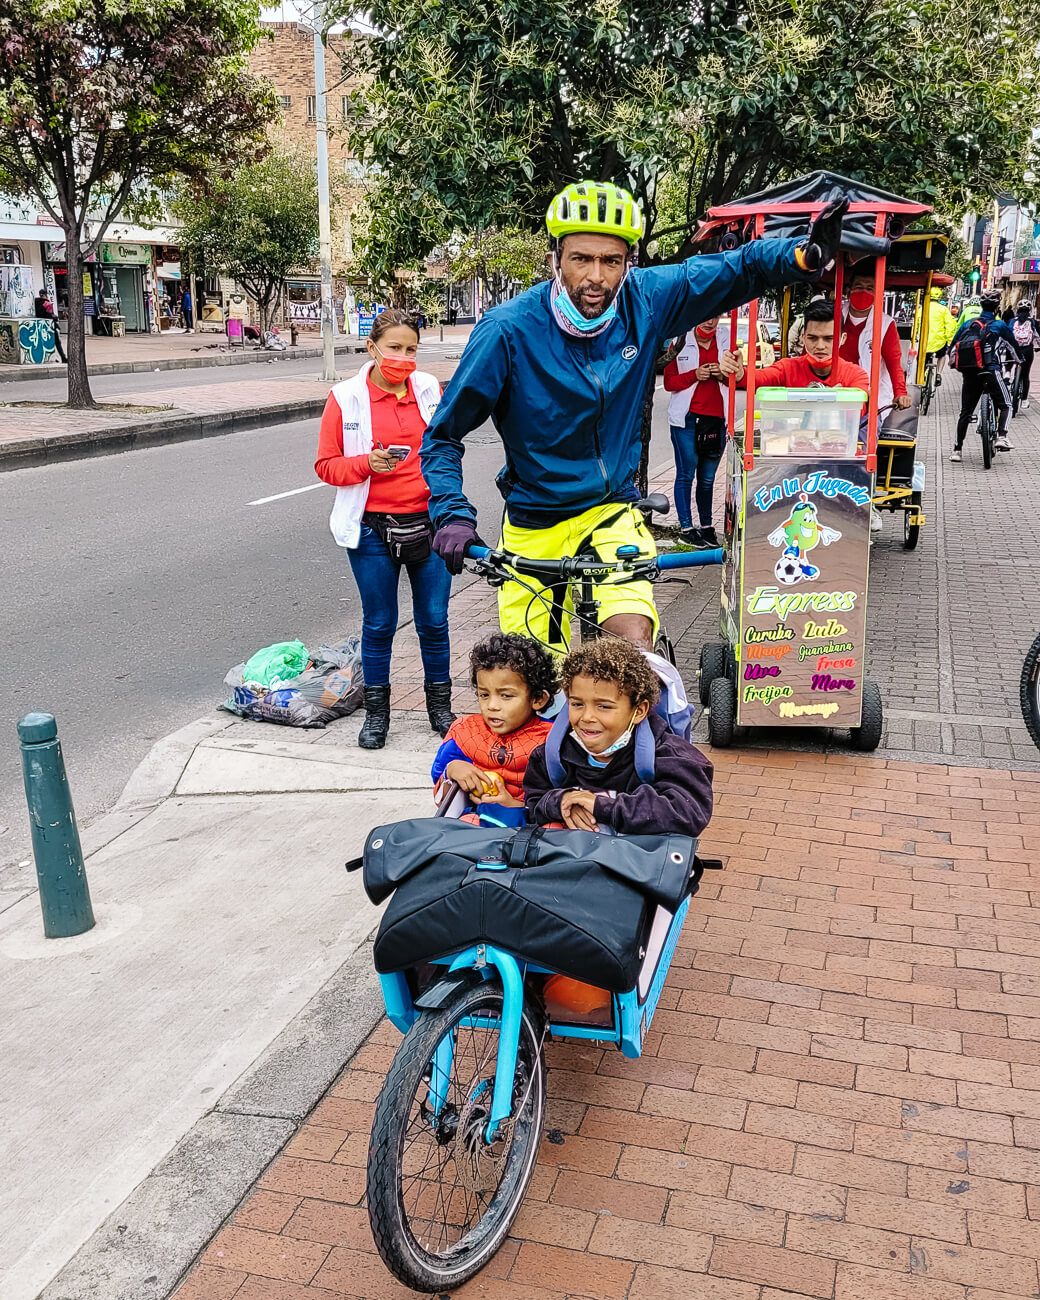 Bogota is a city where many people cycle. A bicycle tour in Bogota with Colomia bike touring takes you along different neighborhoods and places of interest.